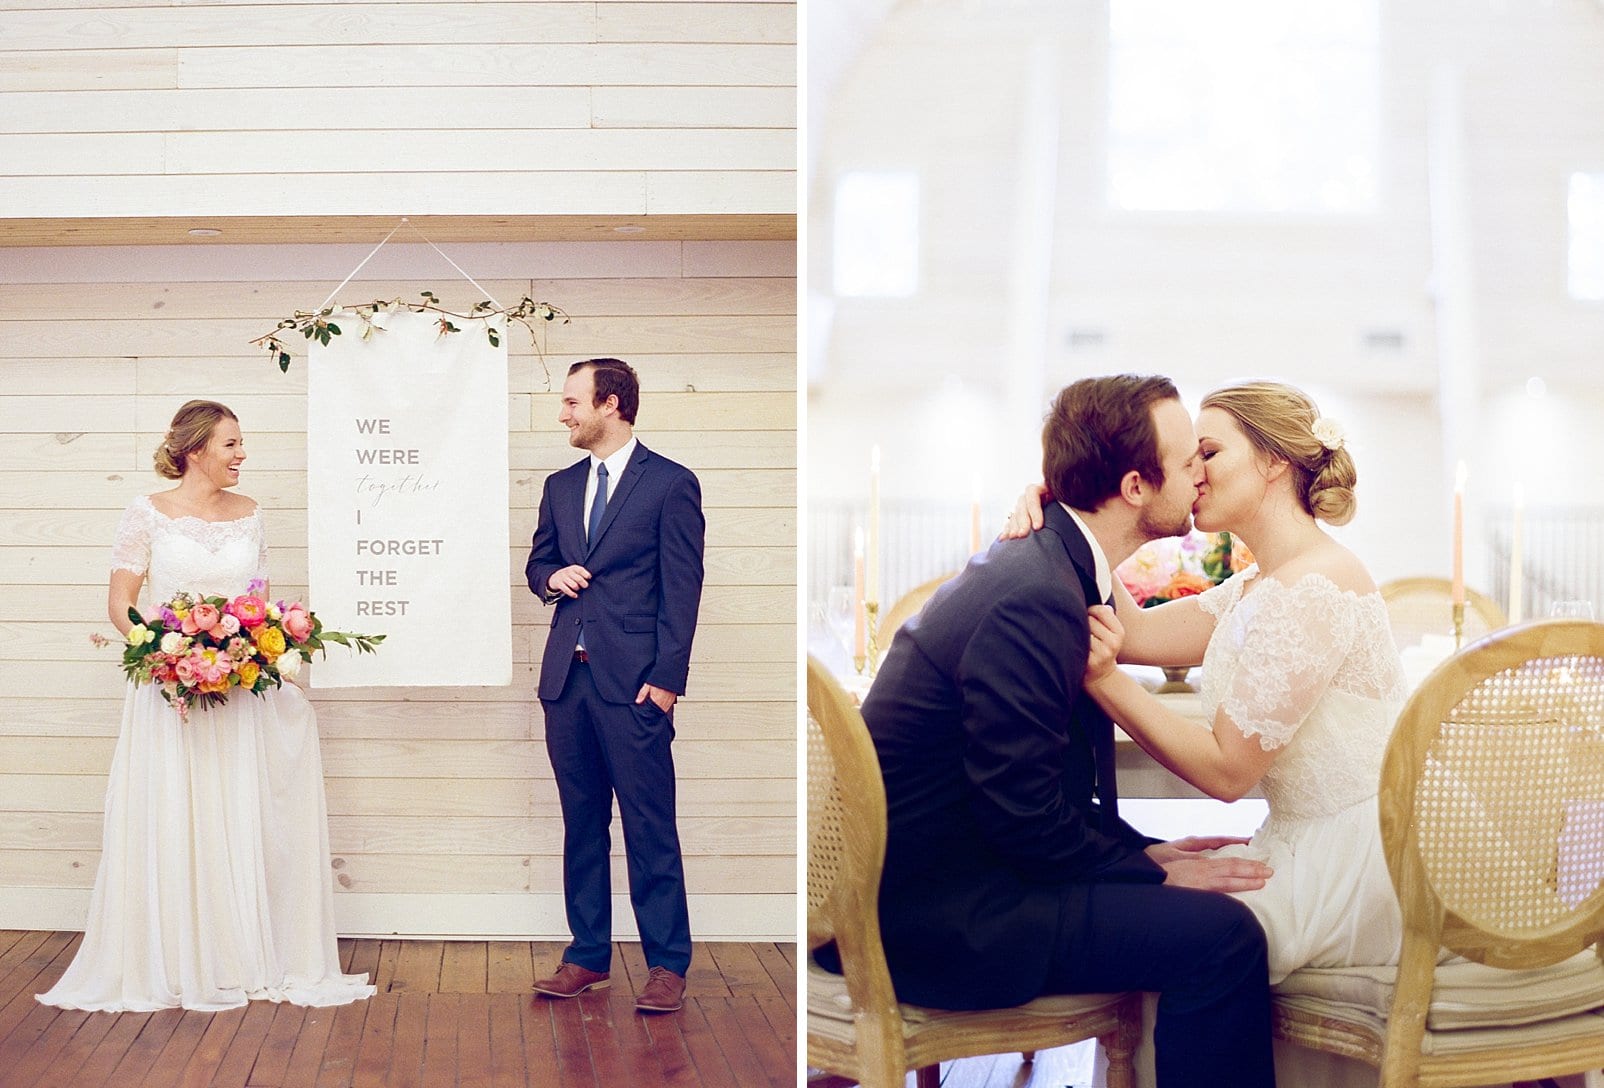 Wakefield barn wedding reception with bride and groom kissing at the sweetheart table photo